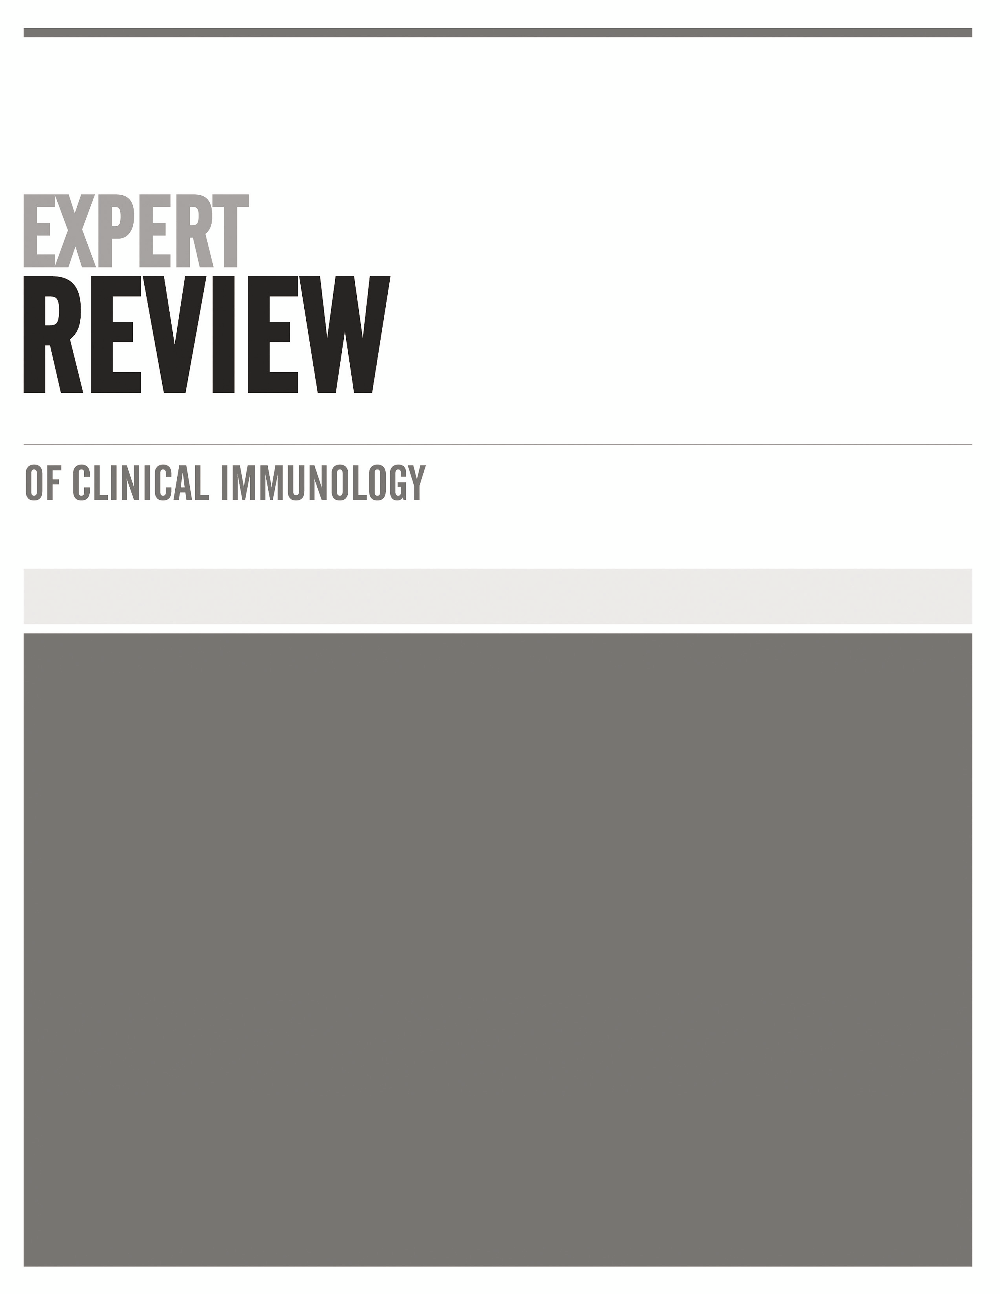 Expert Review of Clinical Immunology journal